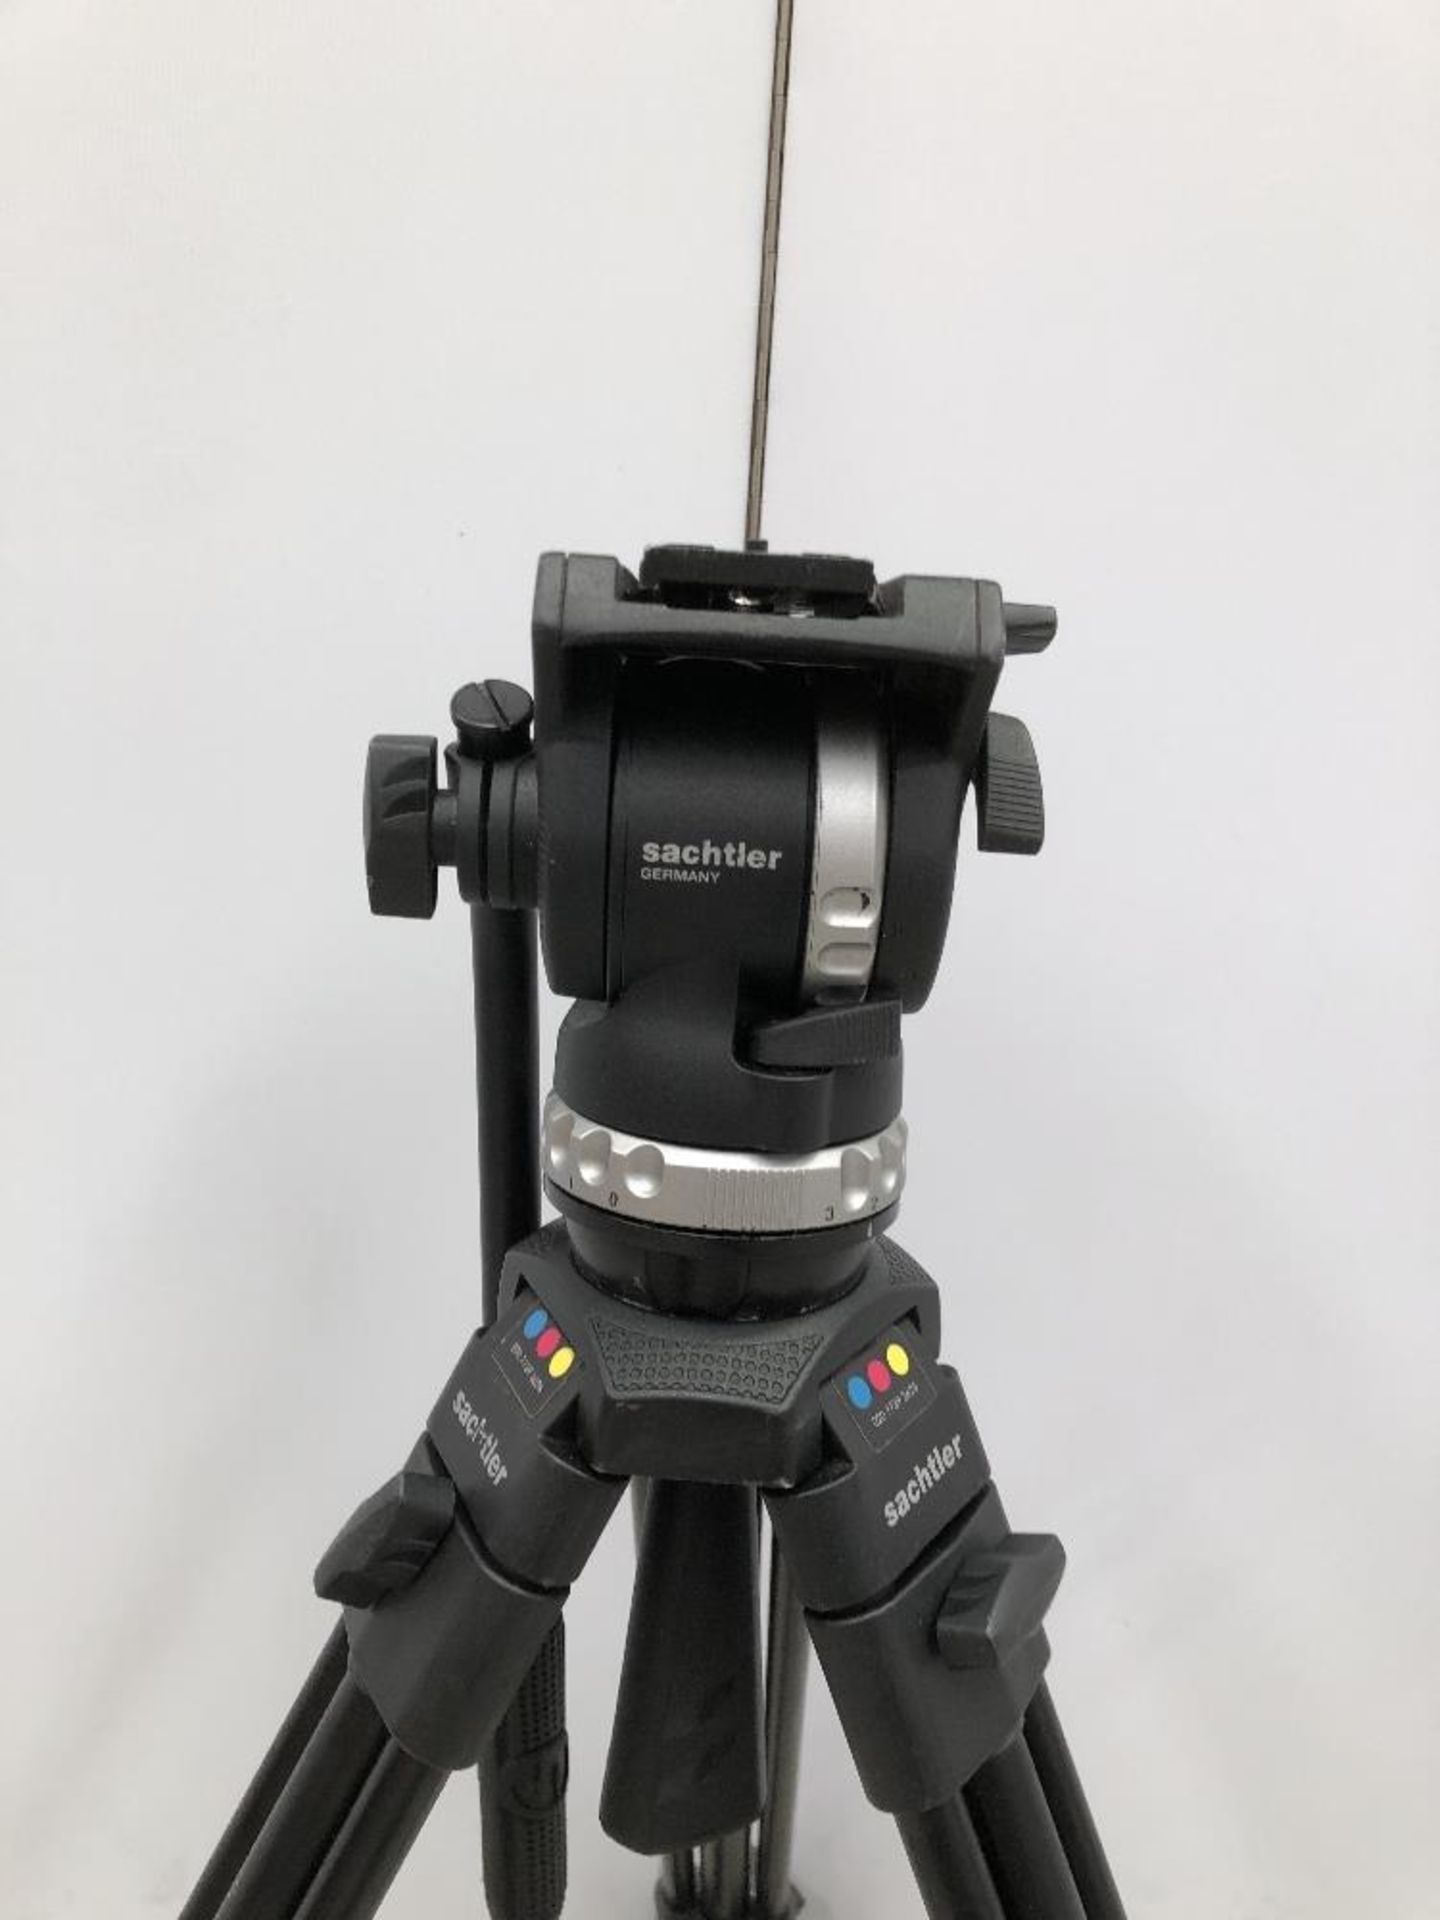 Sachtler Ace M Telescopic Tripod With Fluid head And Carry Bag - Image 3 of 6